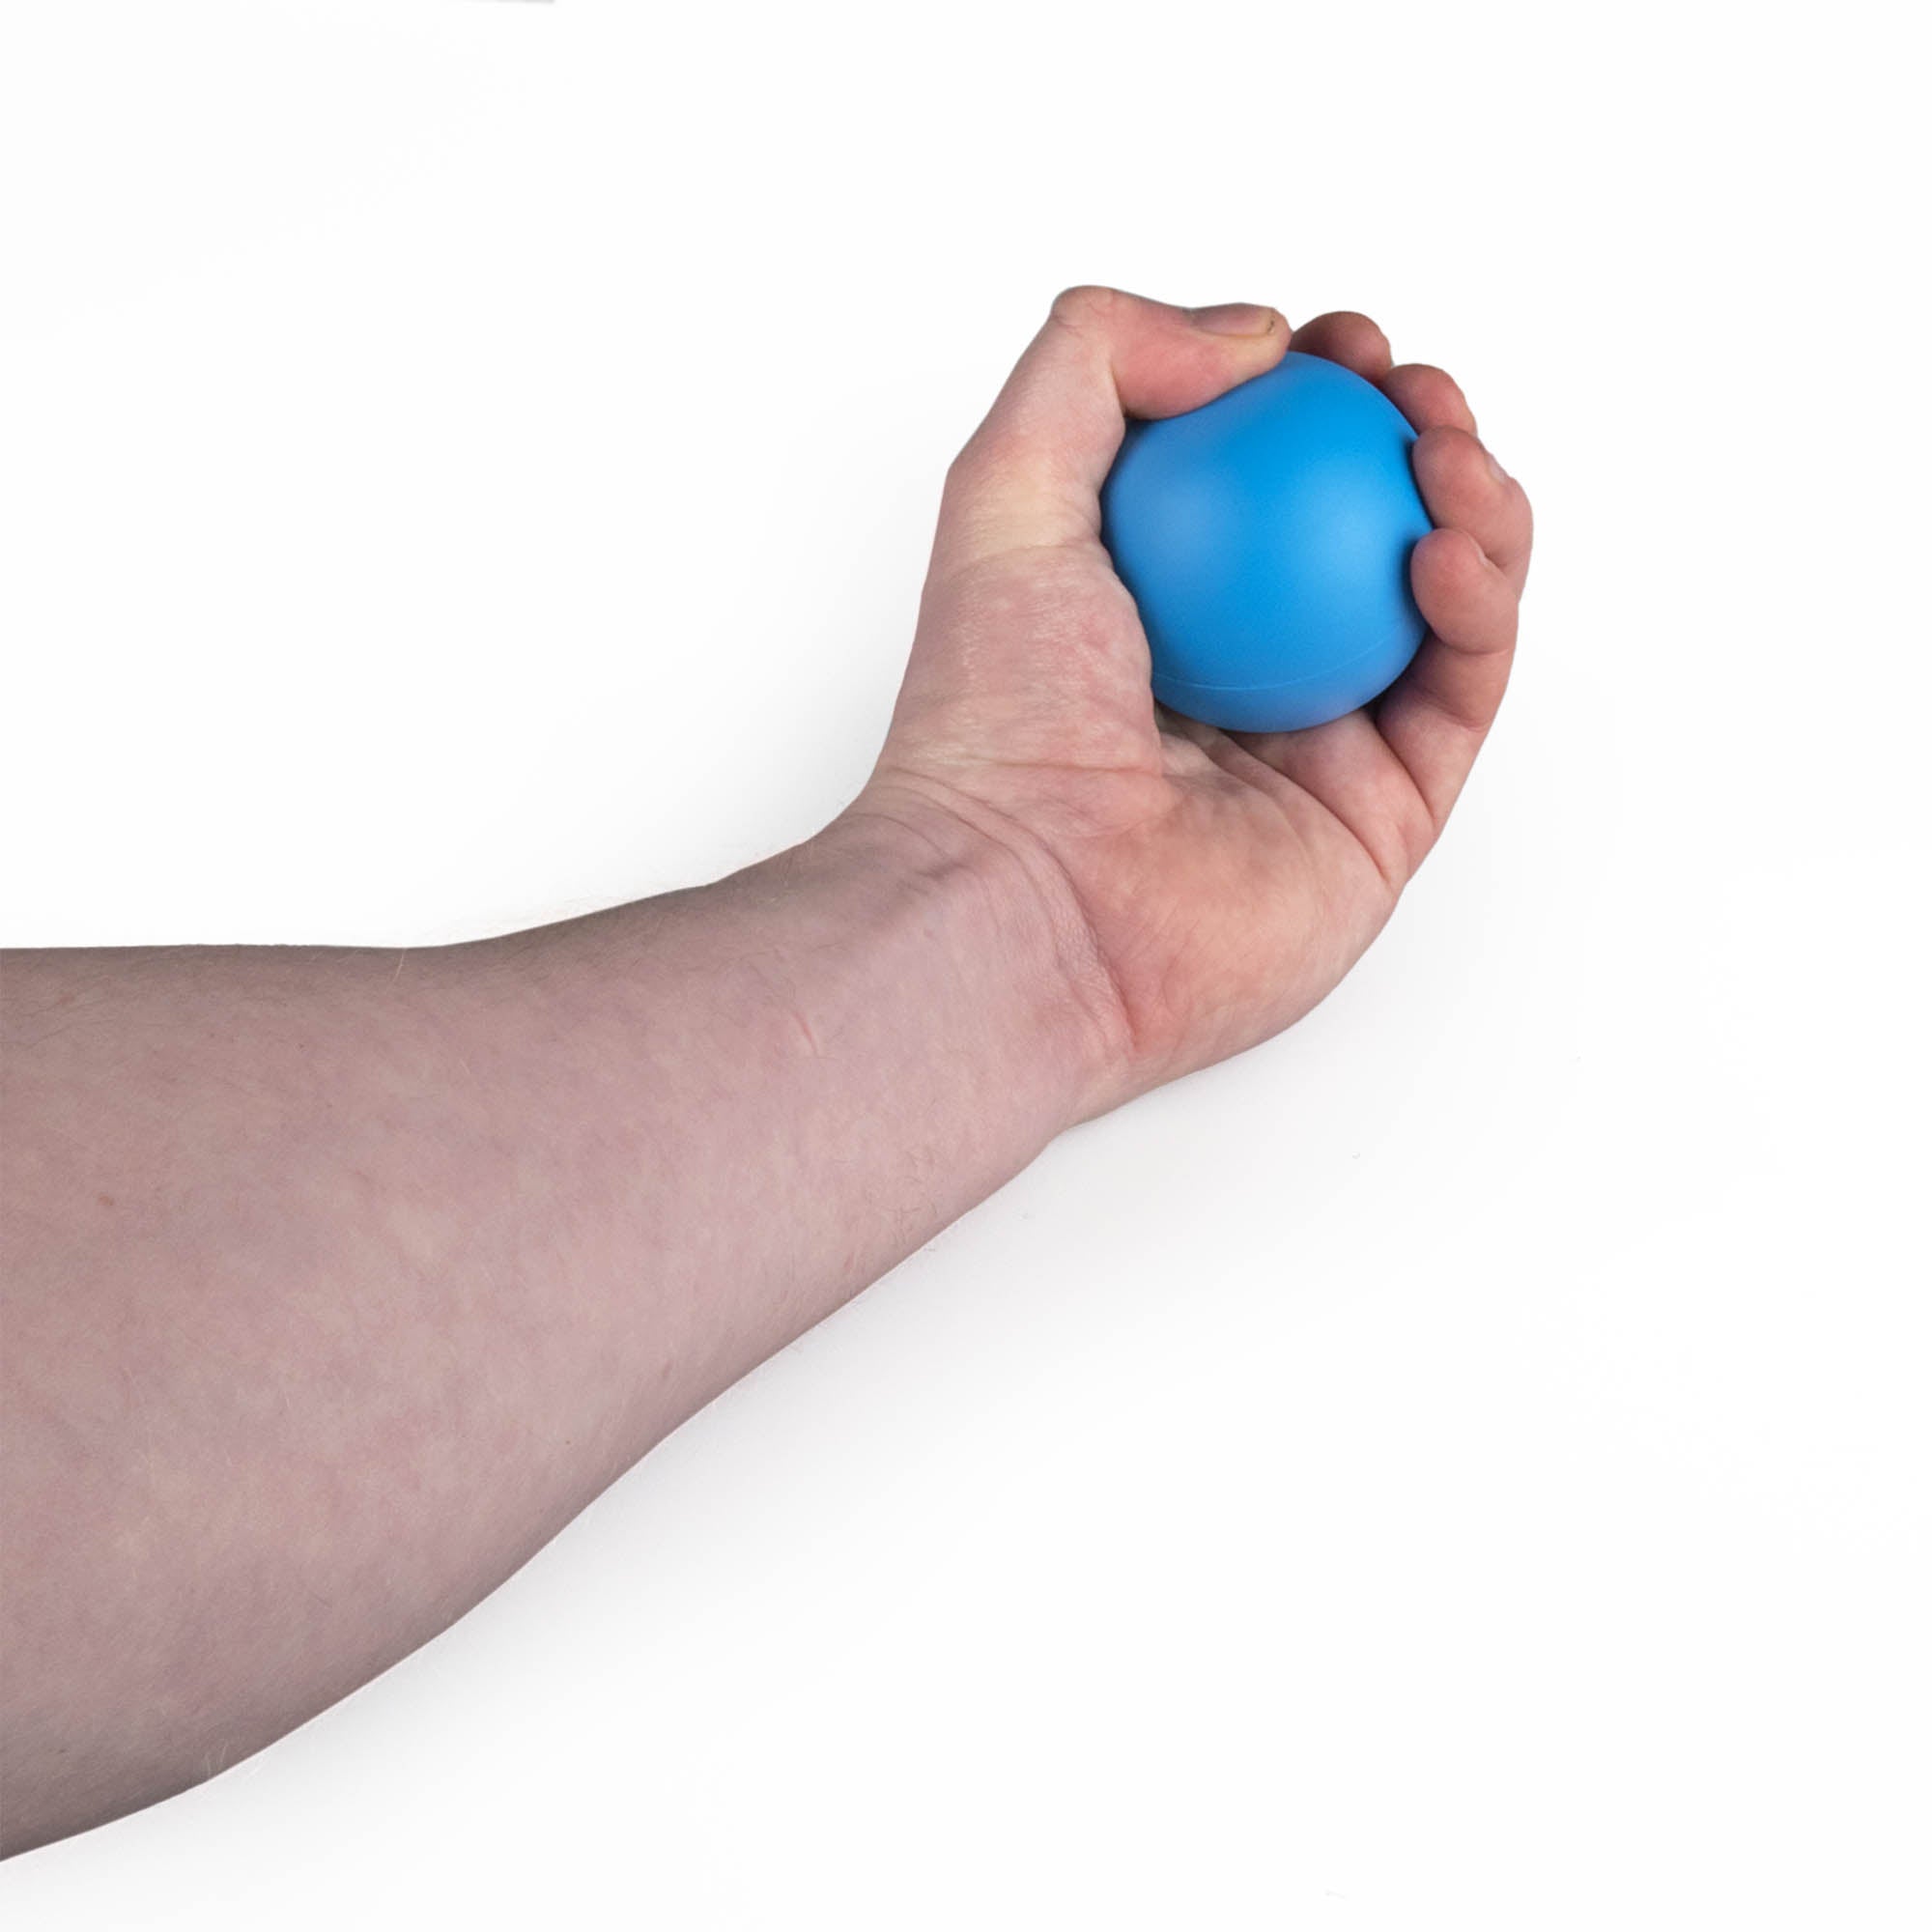 MMX 62mm Juggling ball blue in hand